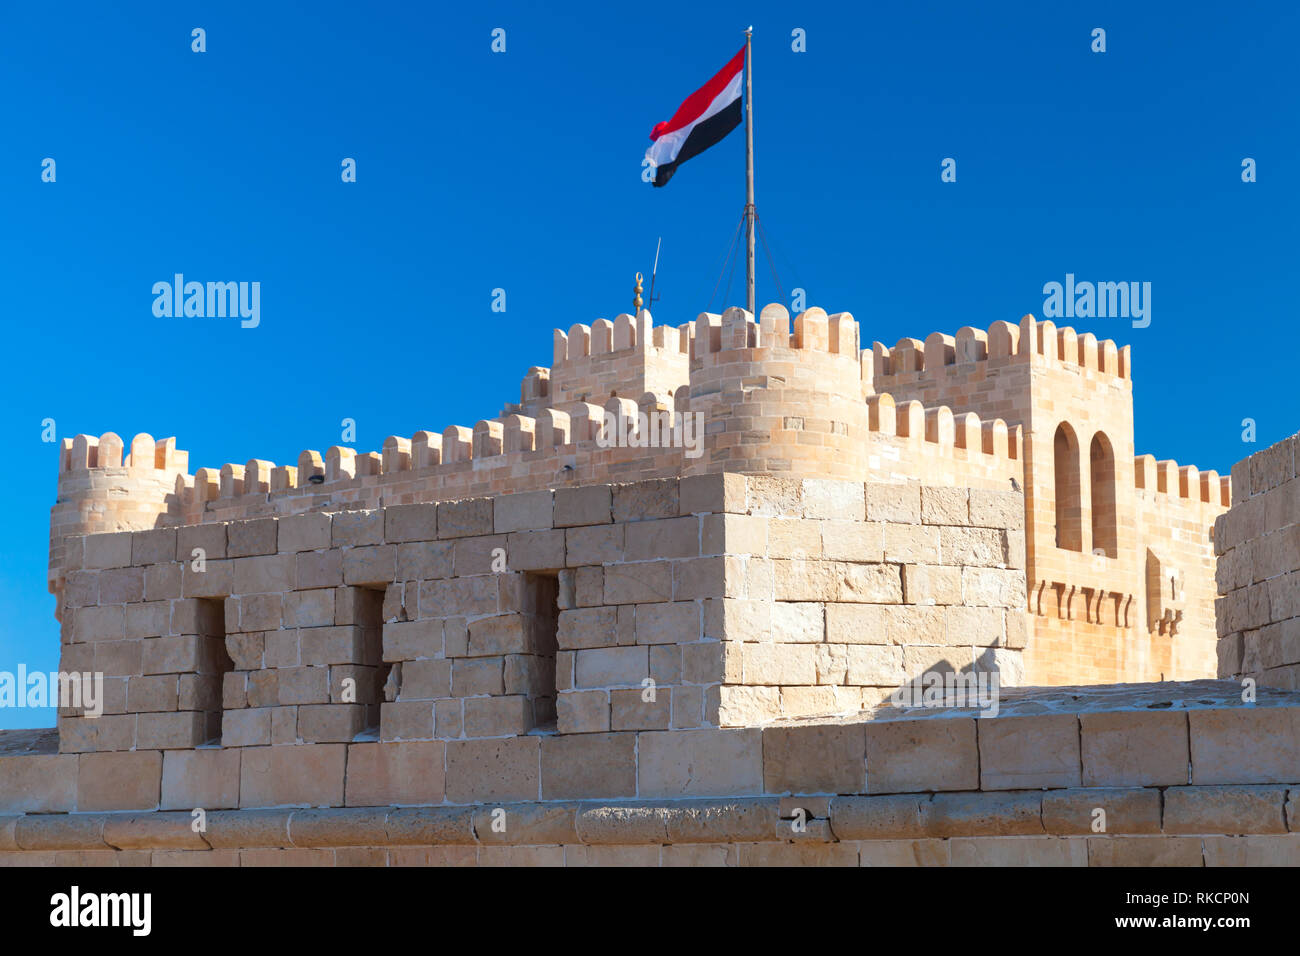 The Citadel of Qaitbay or the Fort of Qaitbay closeup. It is a 15th-century defensive fortress located on the Mediterranean sea coast, Alexandria, Egy Stock Photo